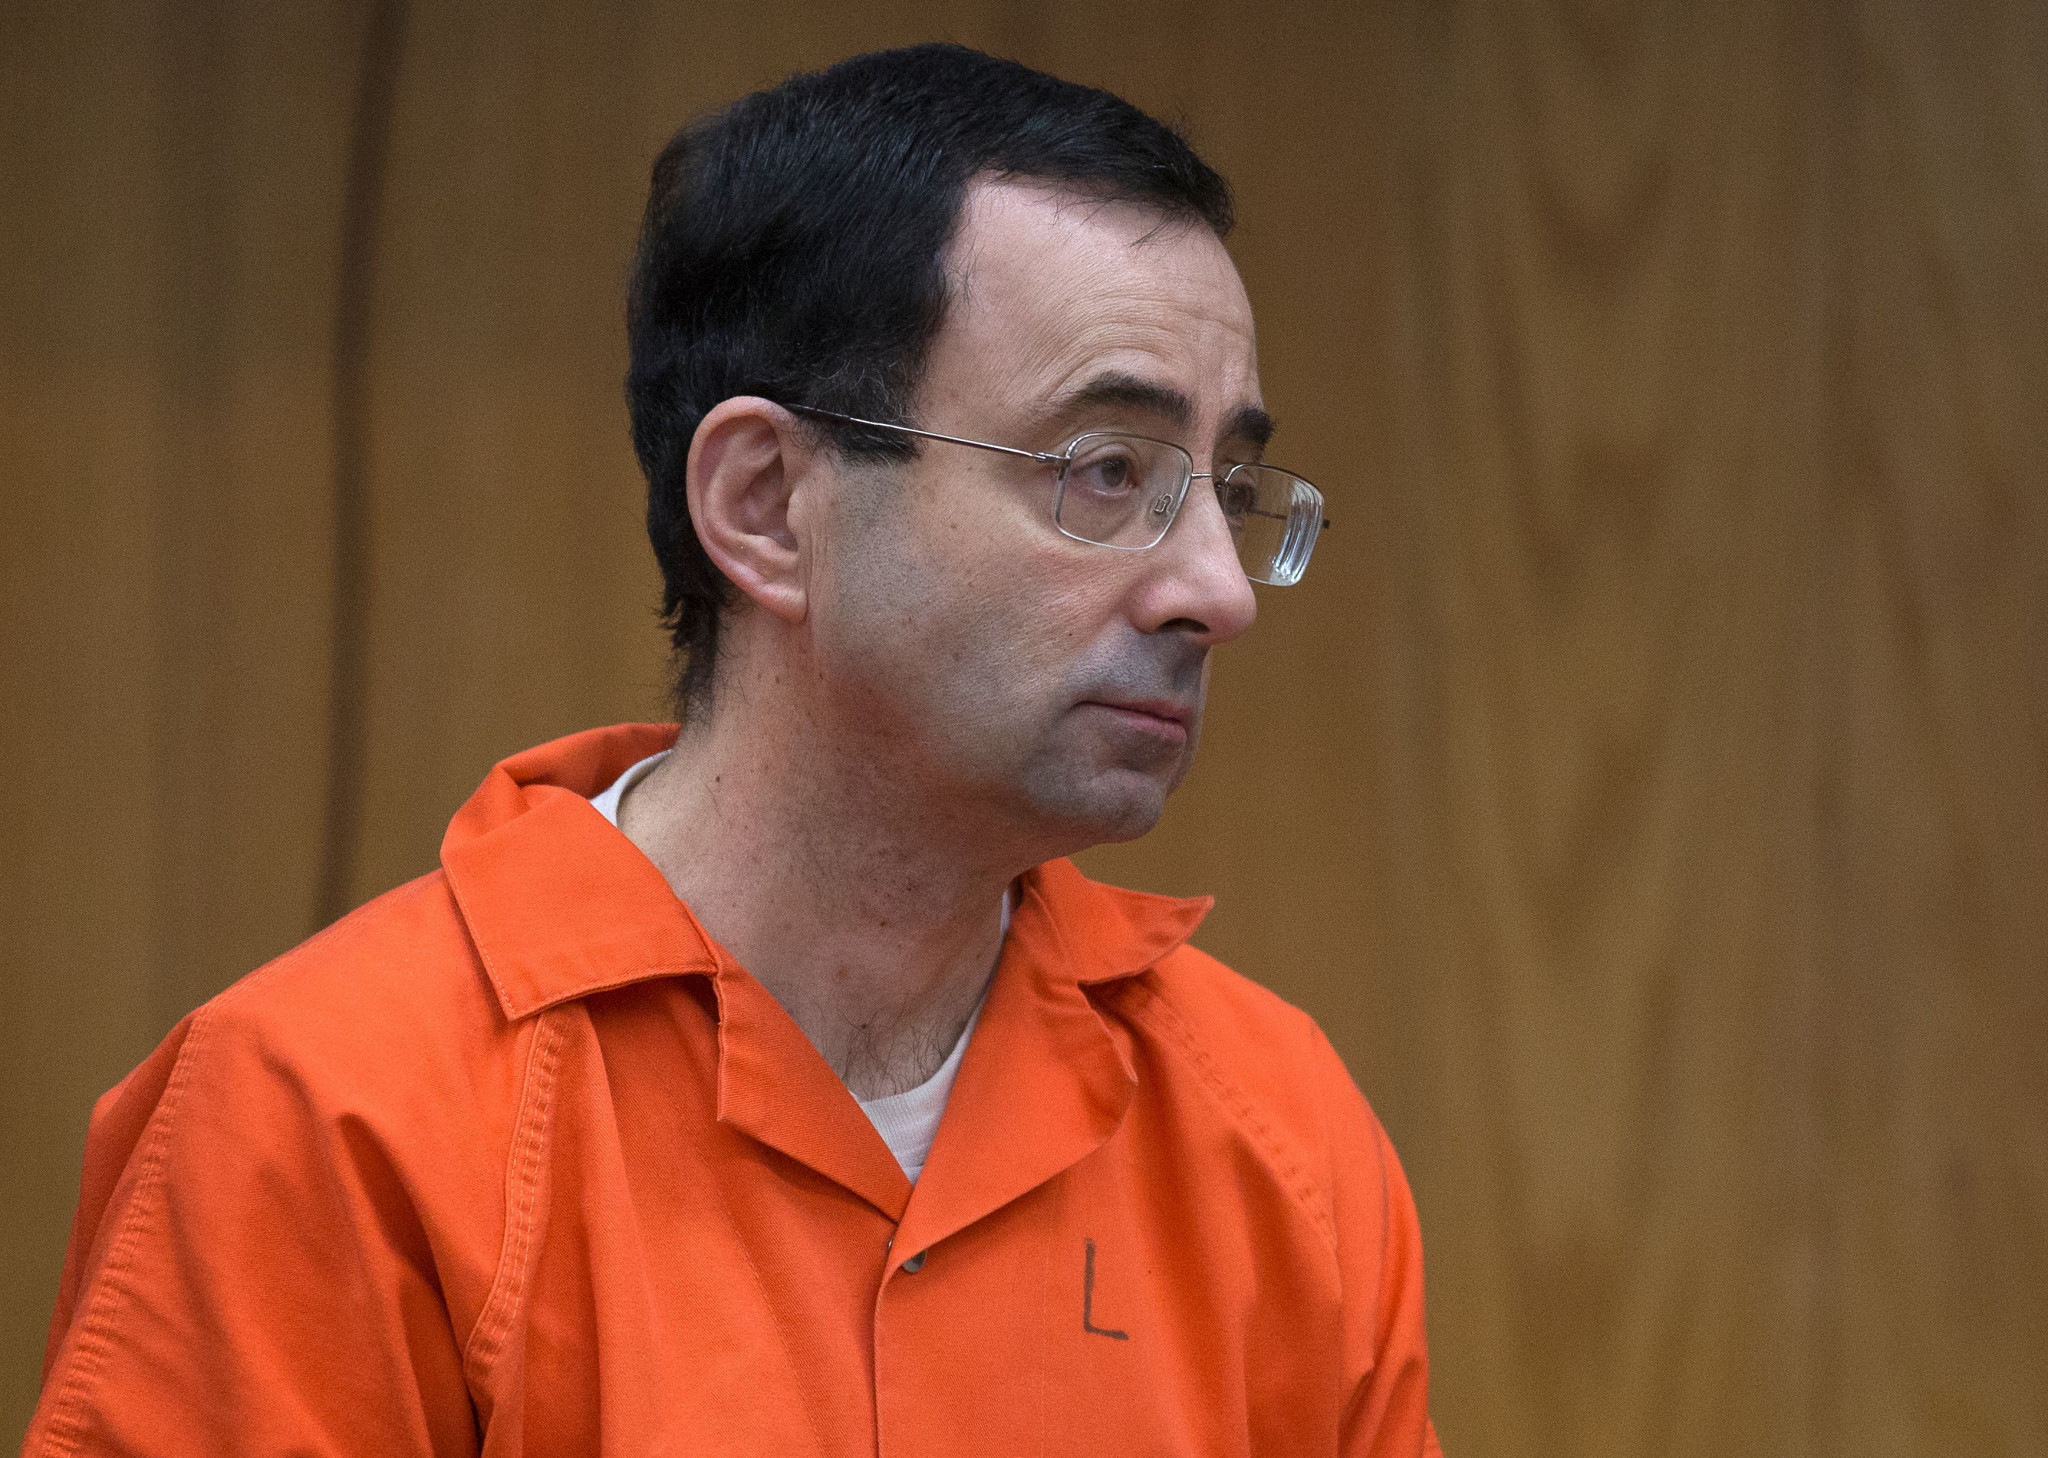 Hundreds of women has testified against former USA Gymnastics doctor Larry Nassar ©Getty Images